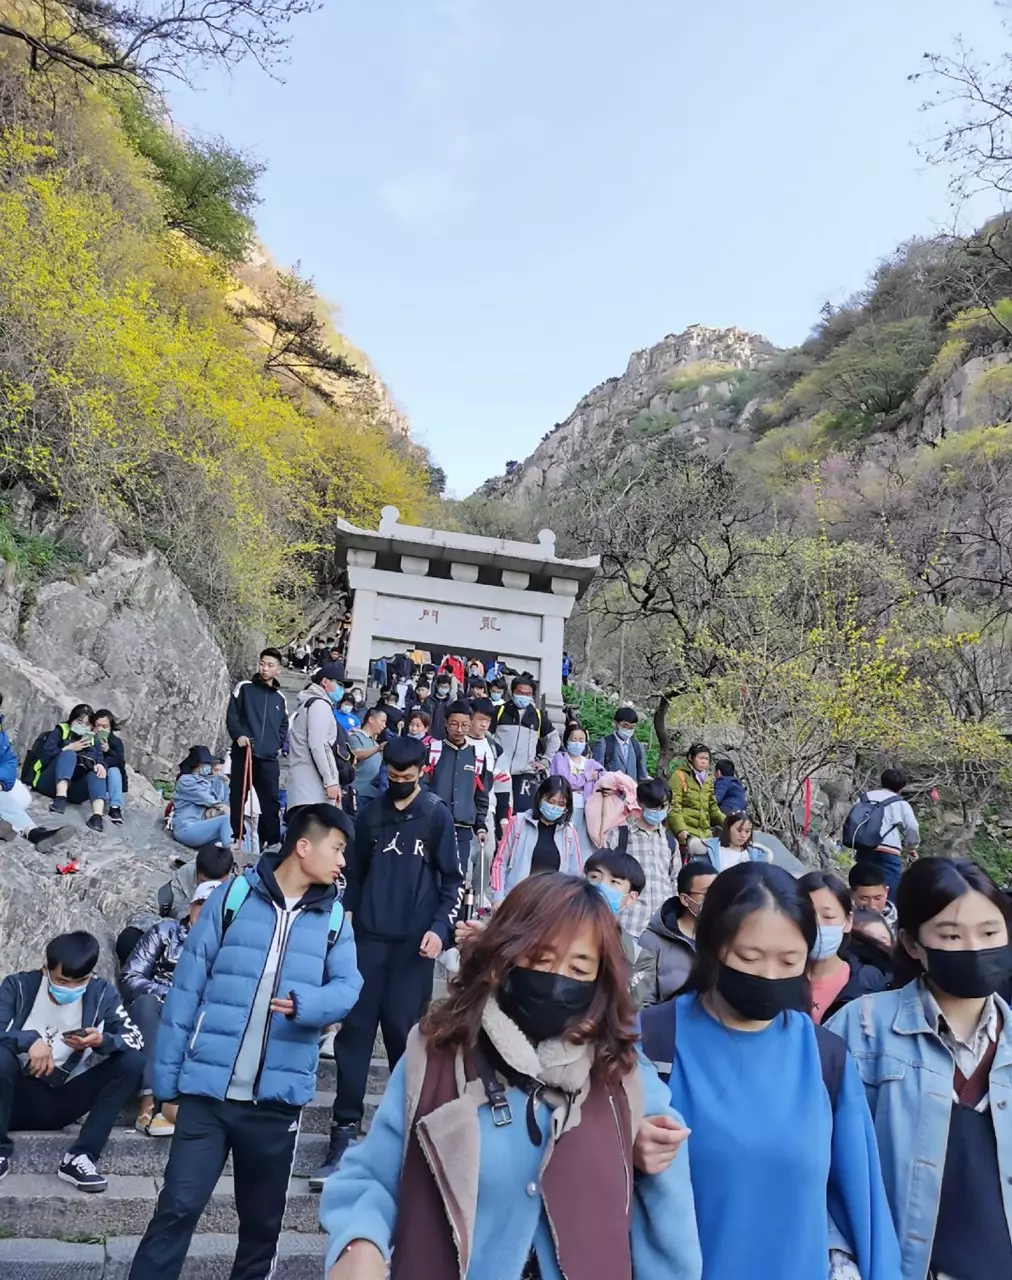 62,000 tourists packed onto the mountain.